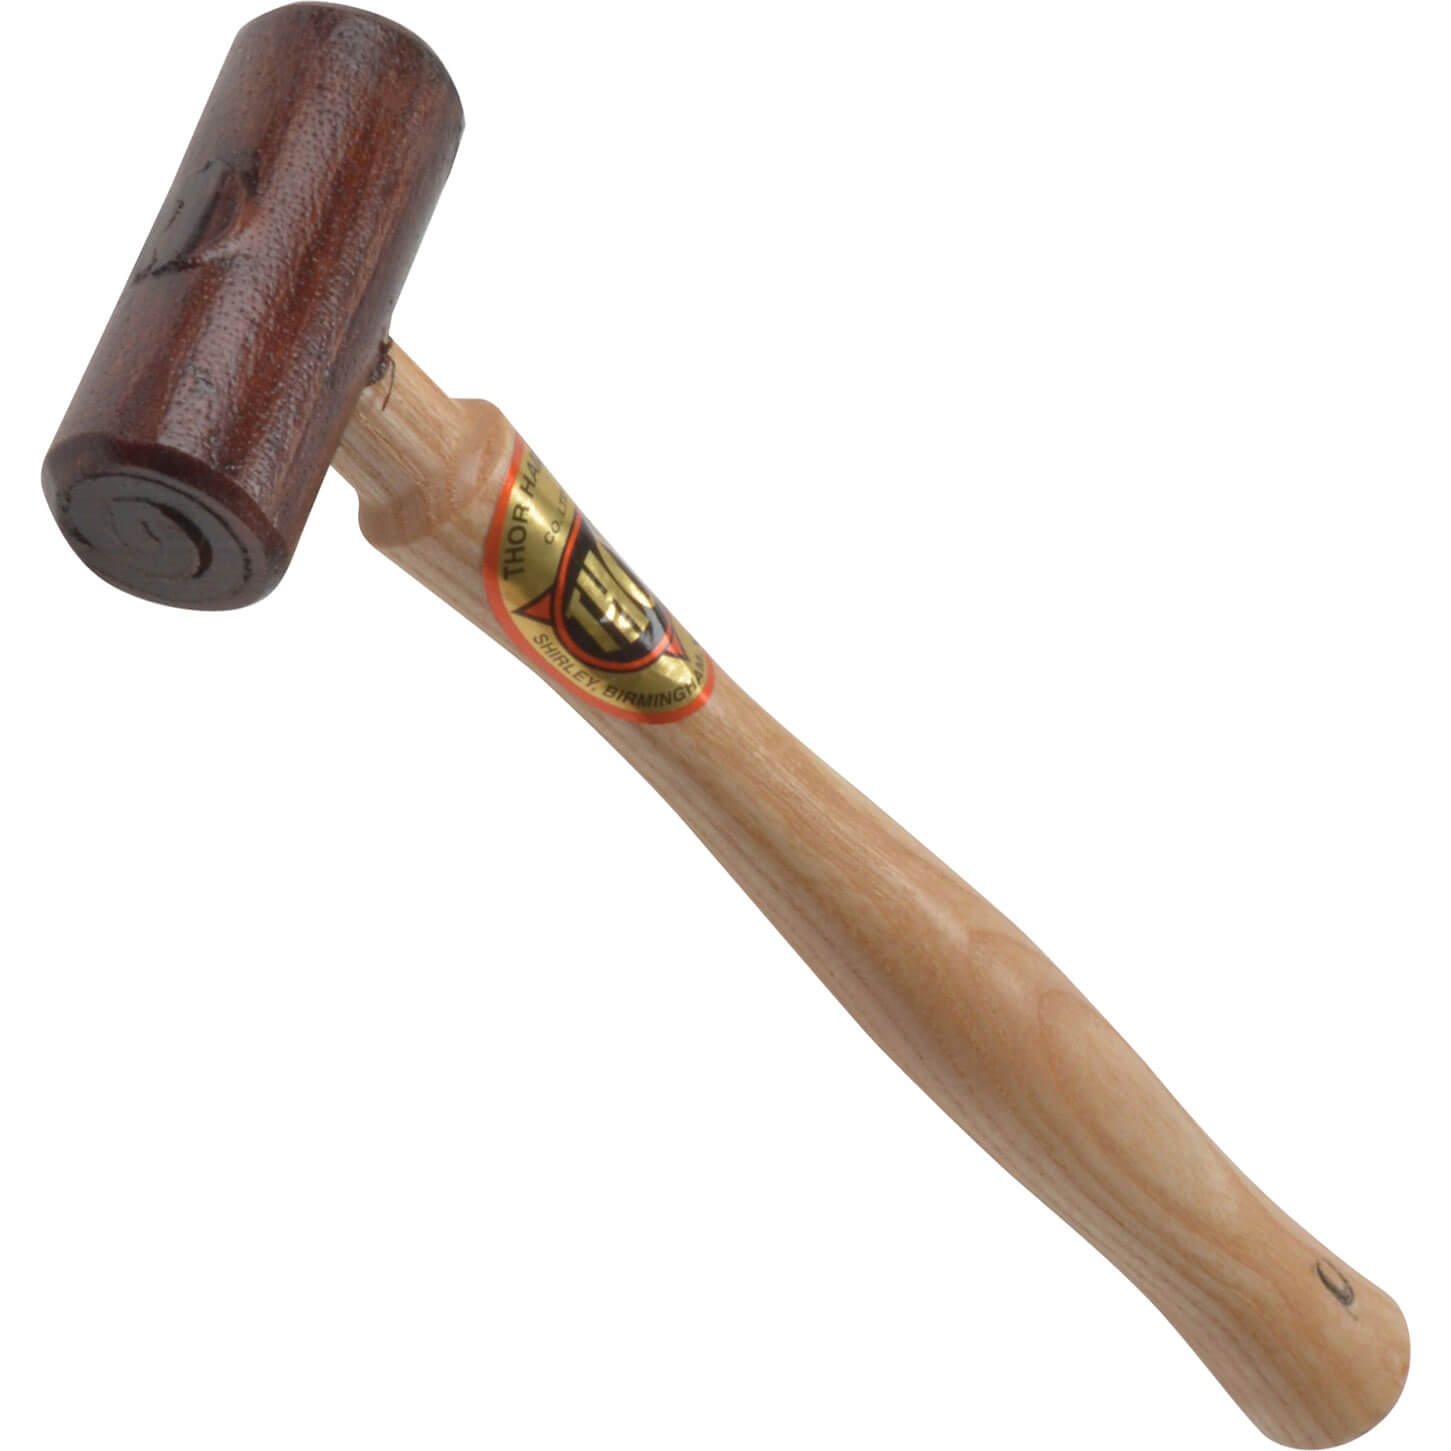 Thor 120 Rawhide Mallet Size 5